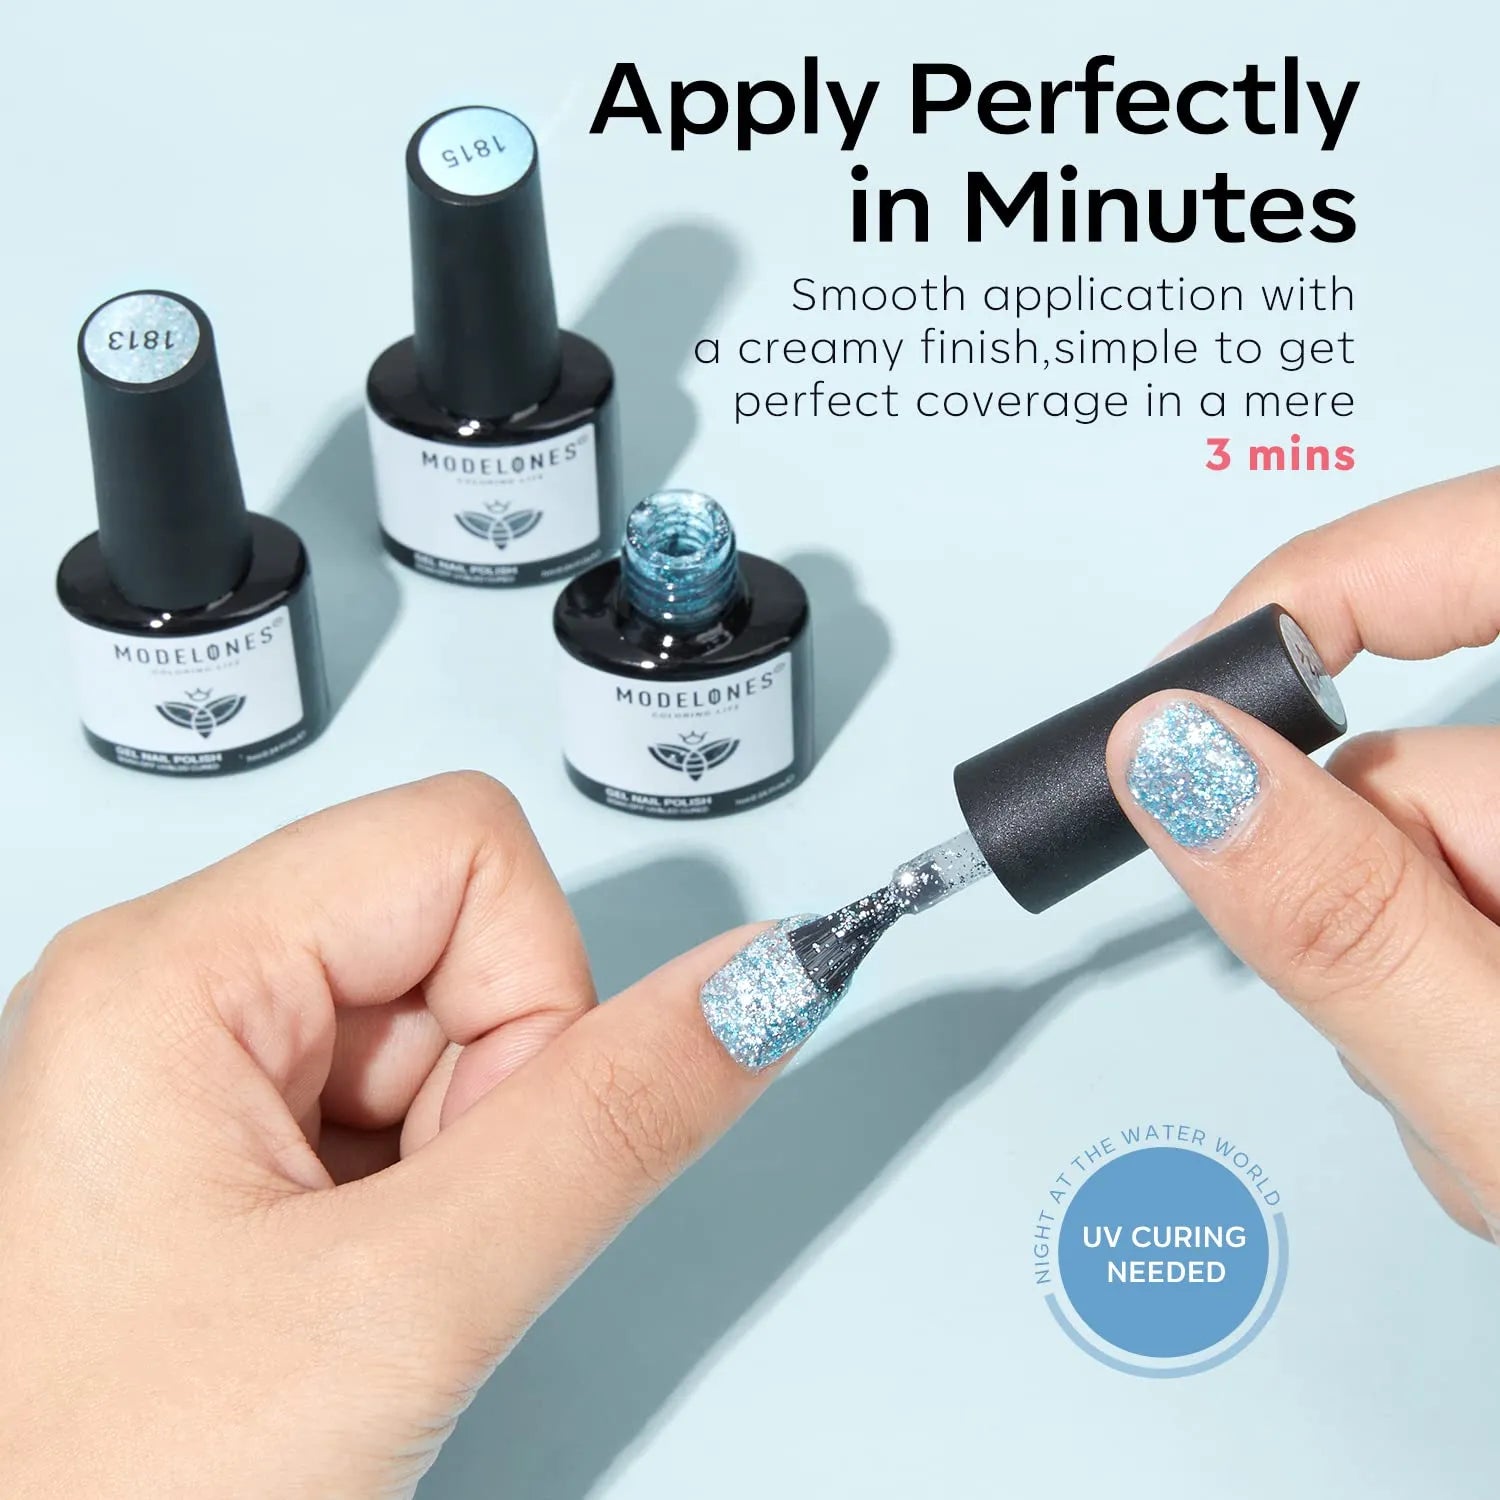 The 7 Best At-Home Gel Nail Polish Kits of 2023, Tested and Reviewed